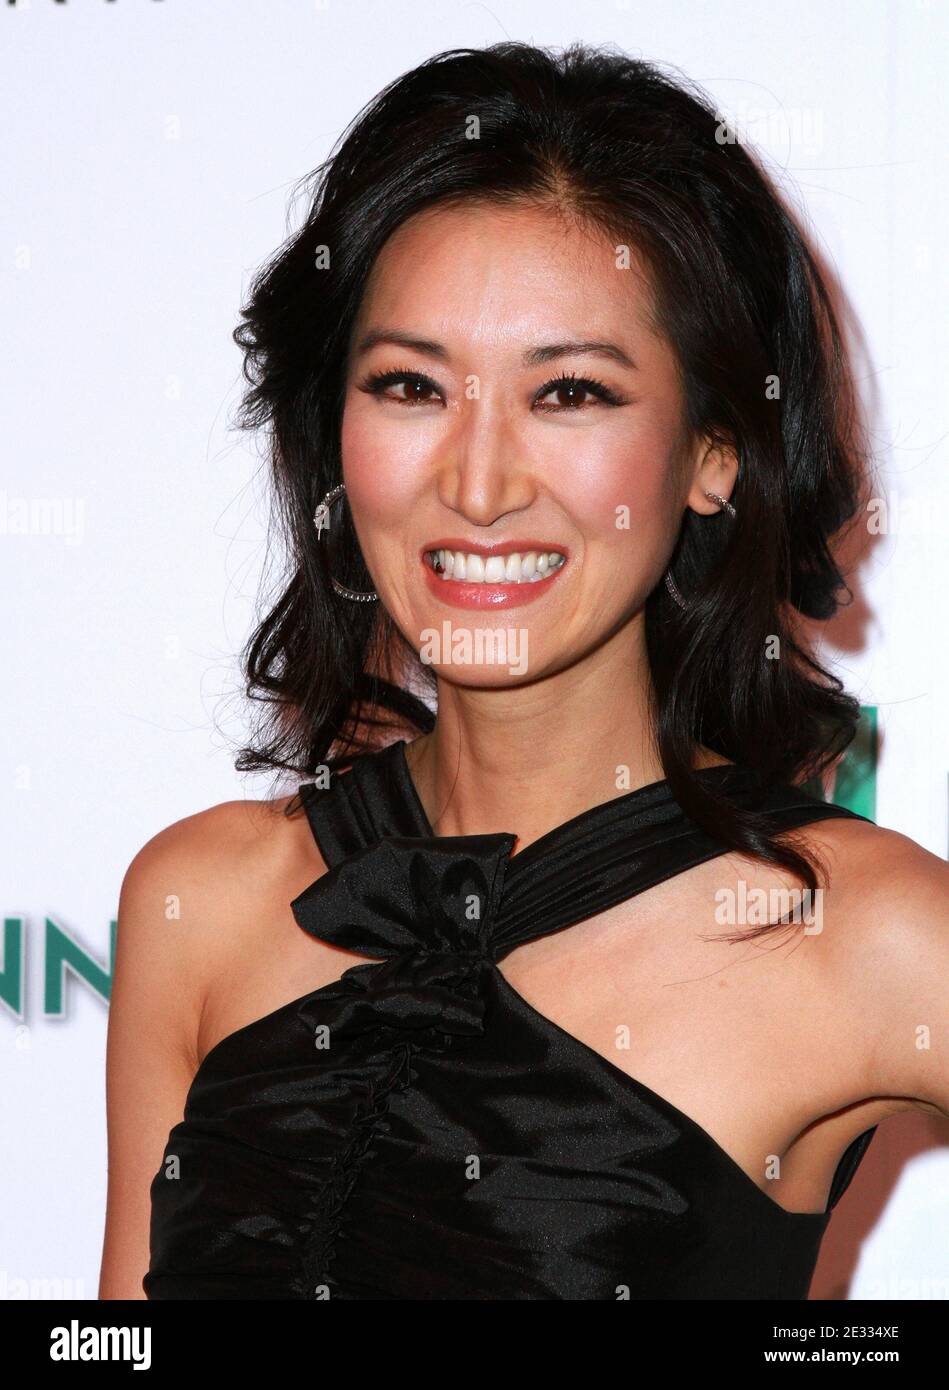 Kelly Choi poses at the 11th Annual BNP Paribas Taste of Tennis event at the W Hotel in New York City, USA on August 26, 2010. Photo by Donna Ward/ABACAPRESS.COM Stock Photo